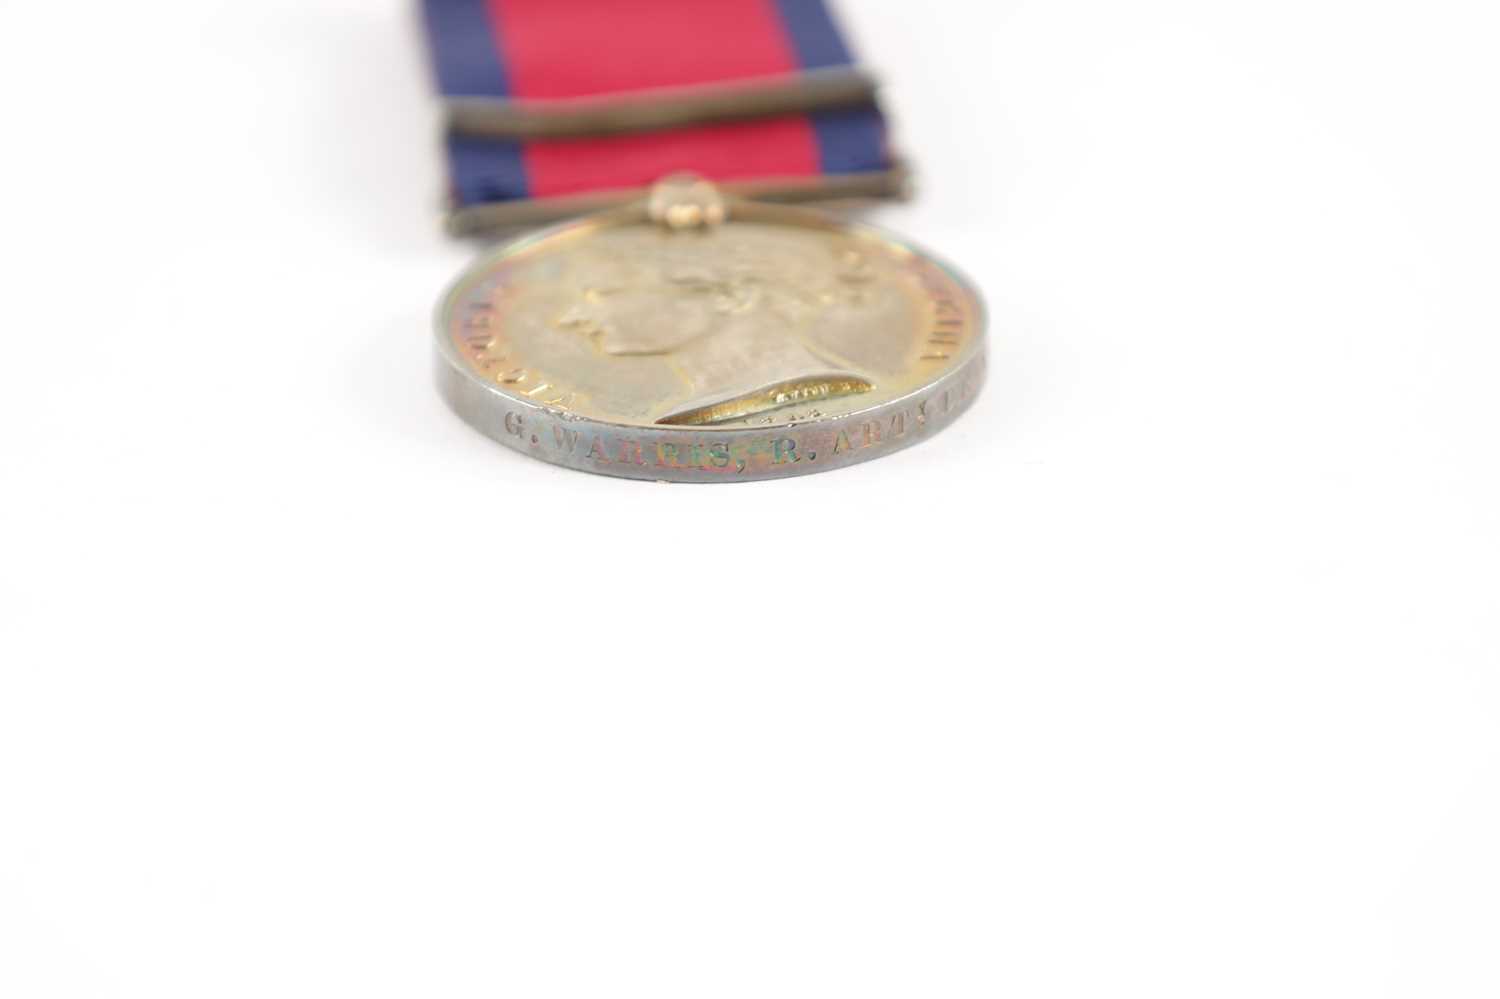 A MILITARY GENERAL SERVICE MEDAL 1793-1814 WITH TWO CLASPS - Image 5 of 5